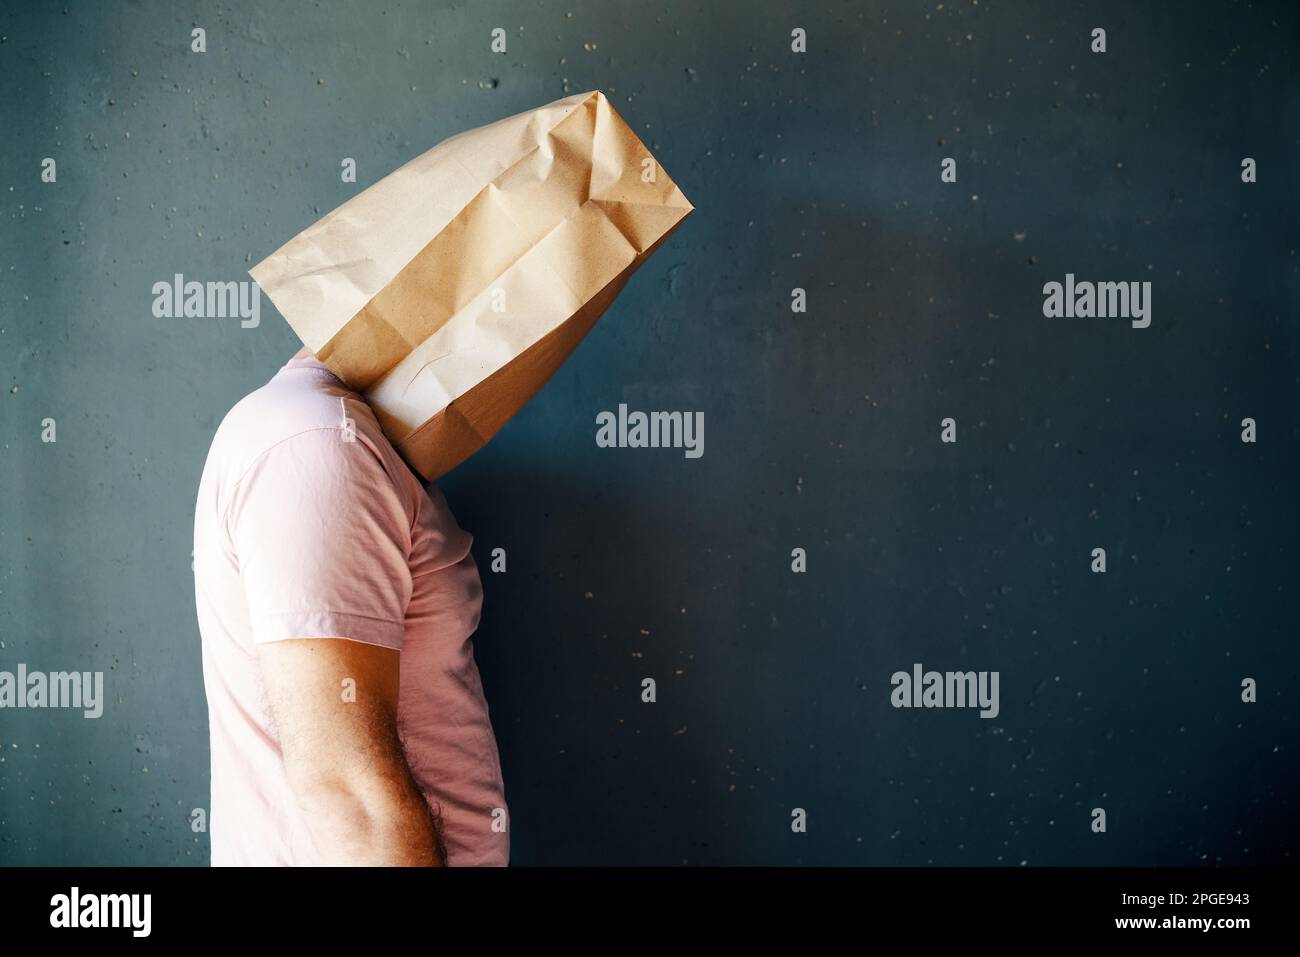 Profile view of upset man with a paper bag on head over gray background with copy space. People emotion concept Stock Photo